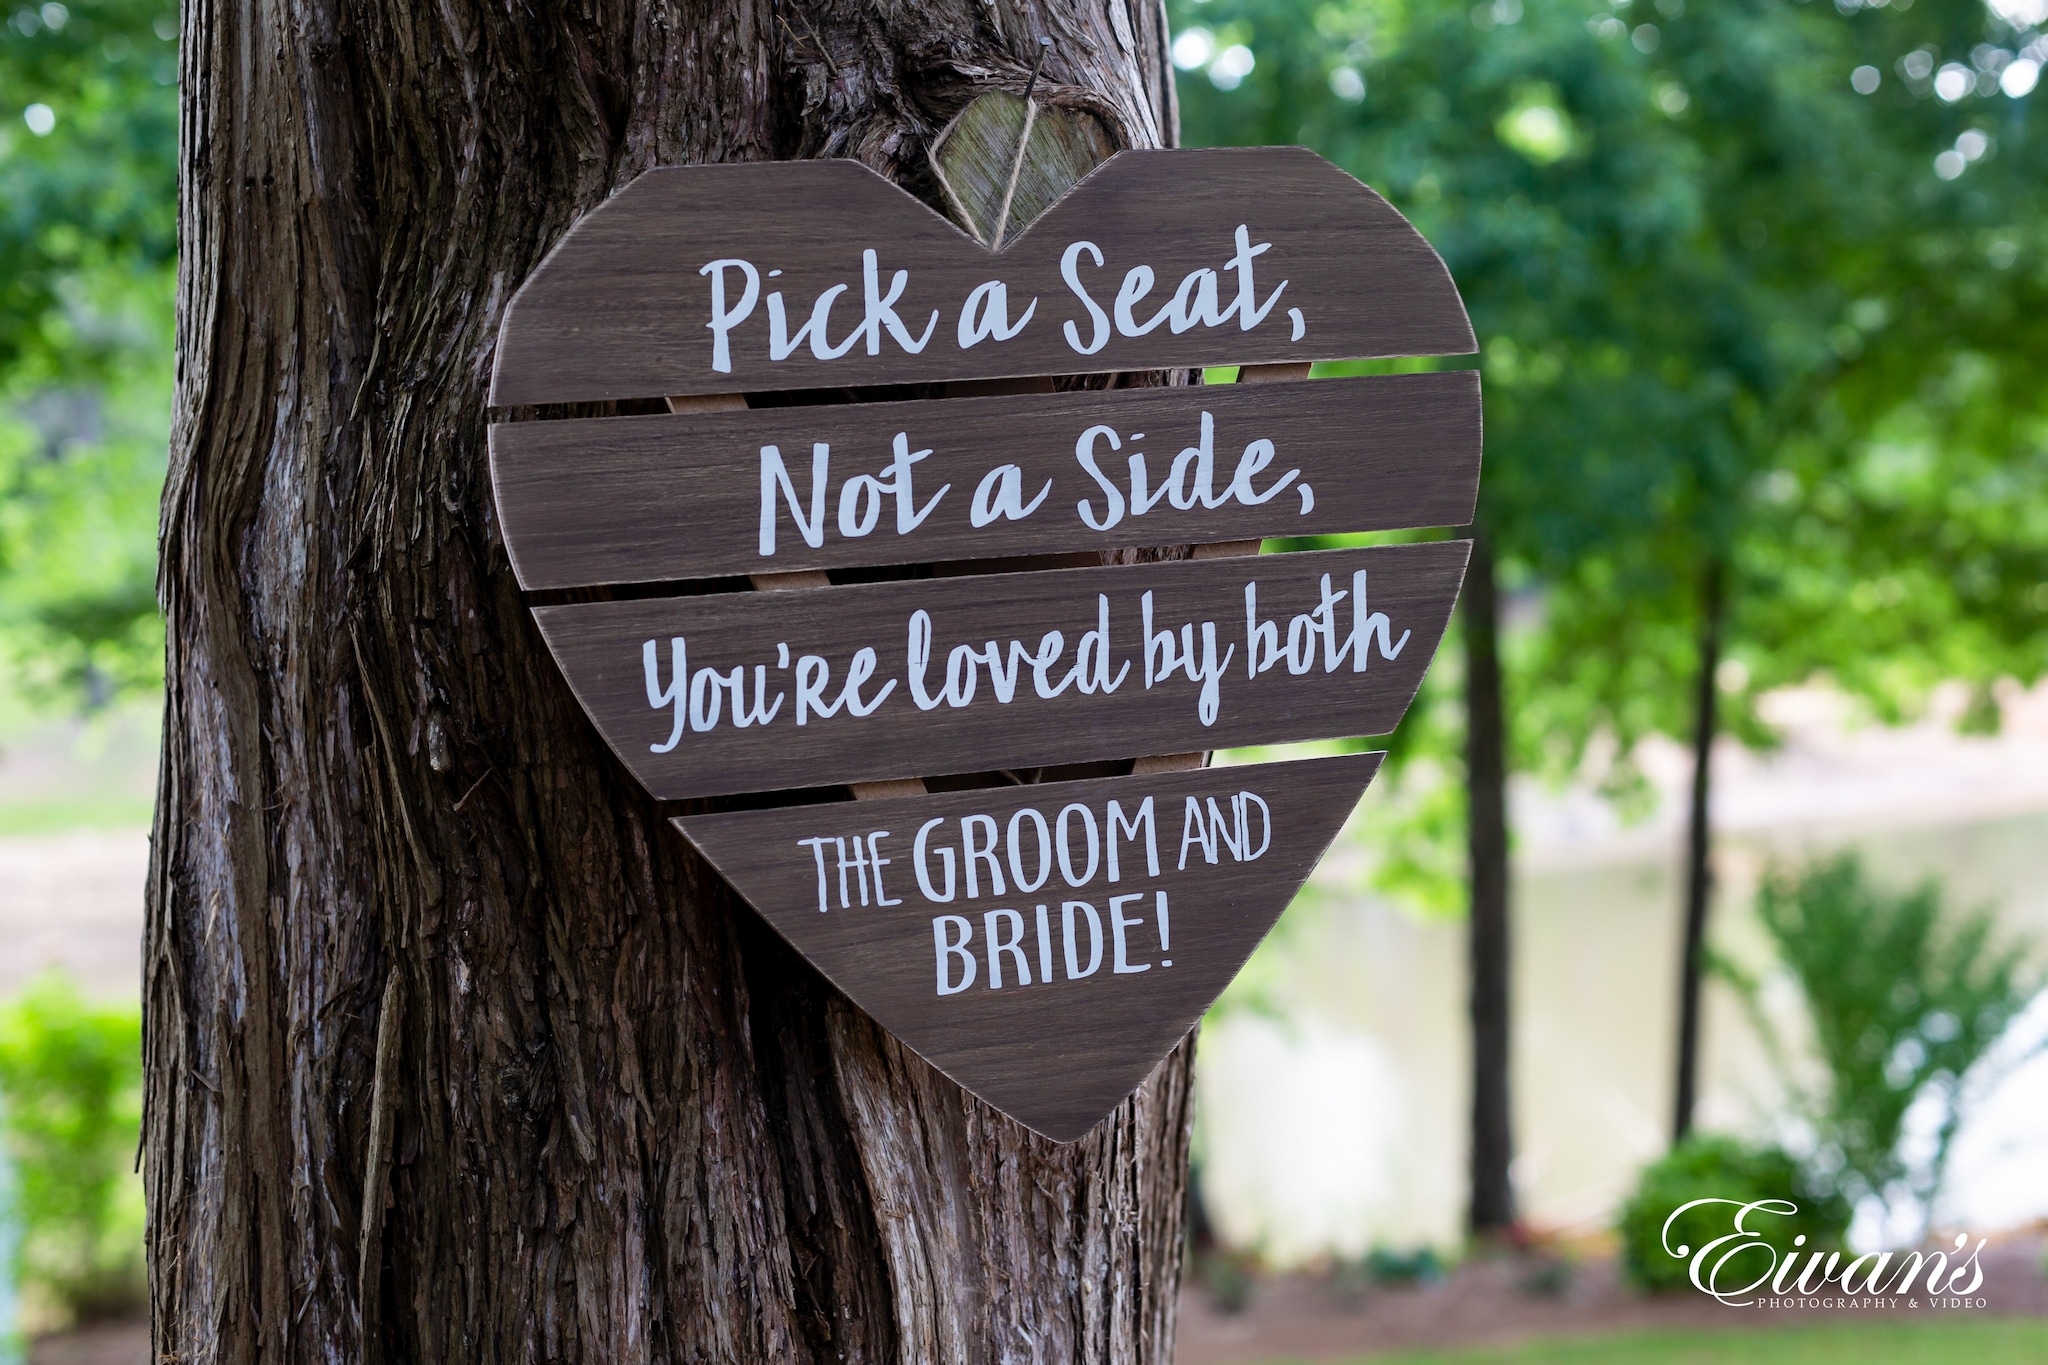 Pick A Seat Not A Side You're Loved by Groom And Bride Wooden Sign